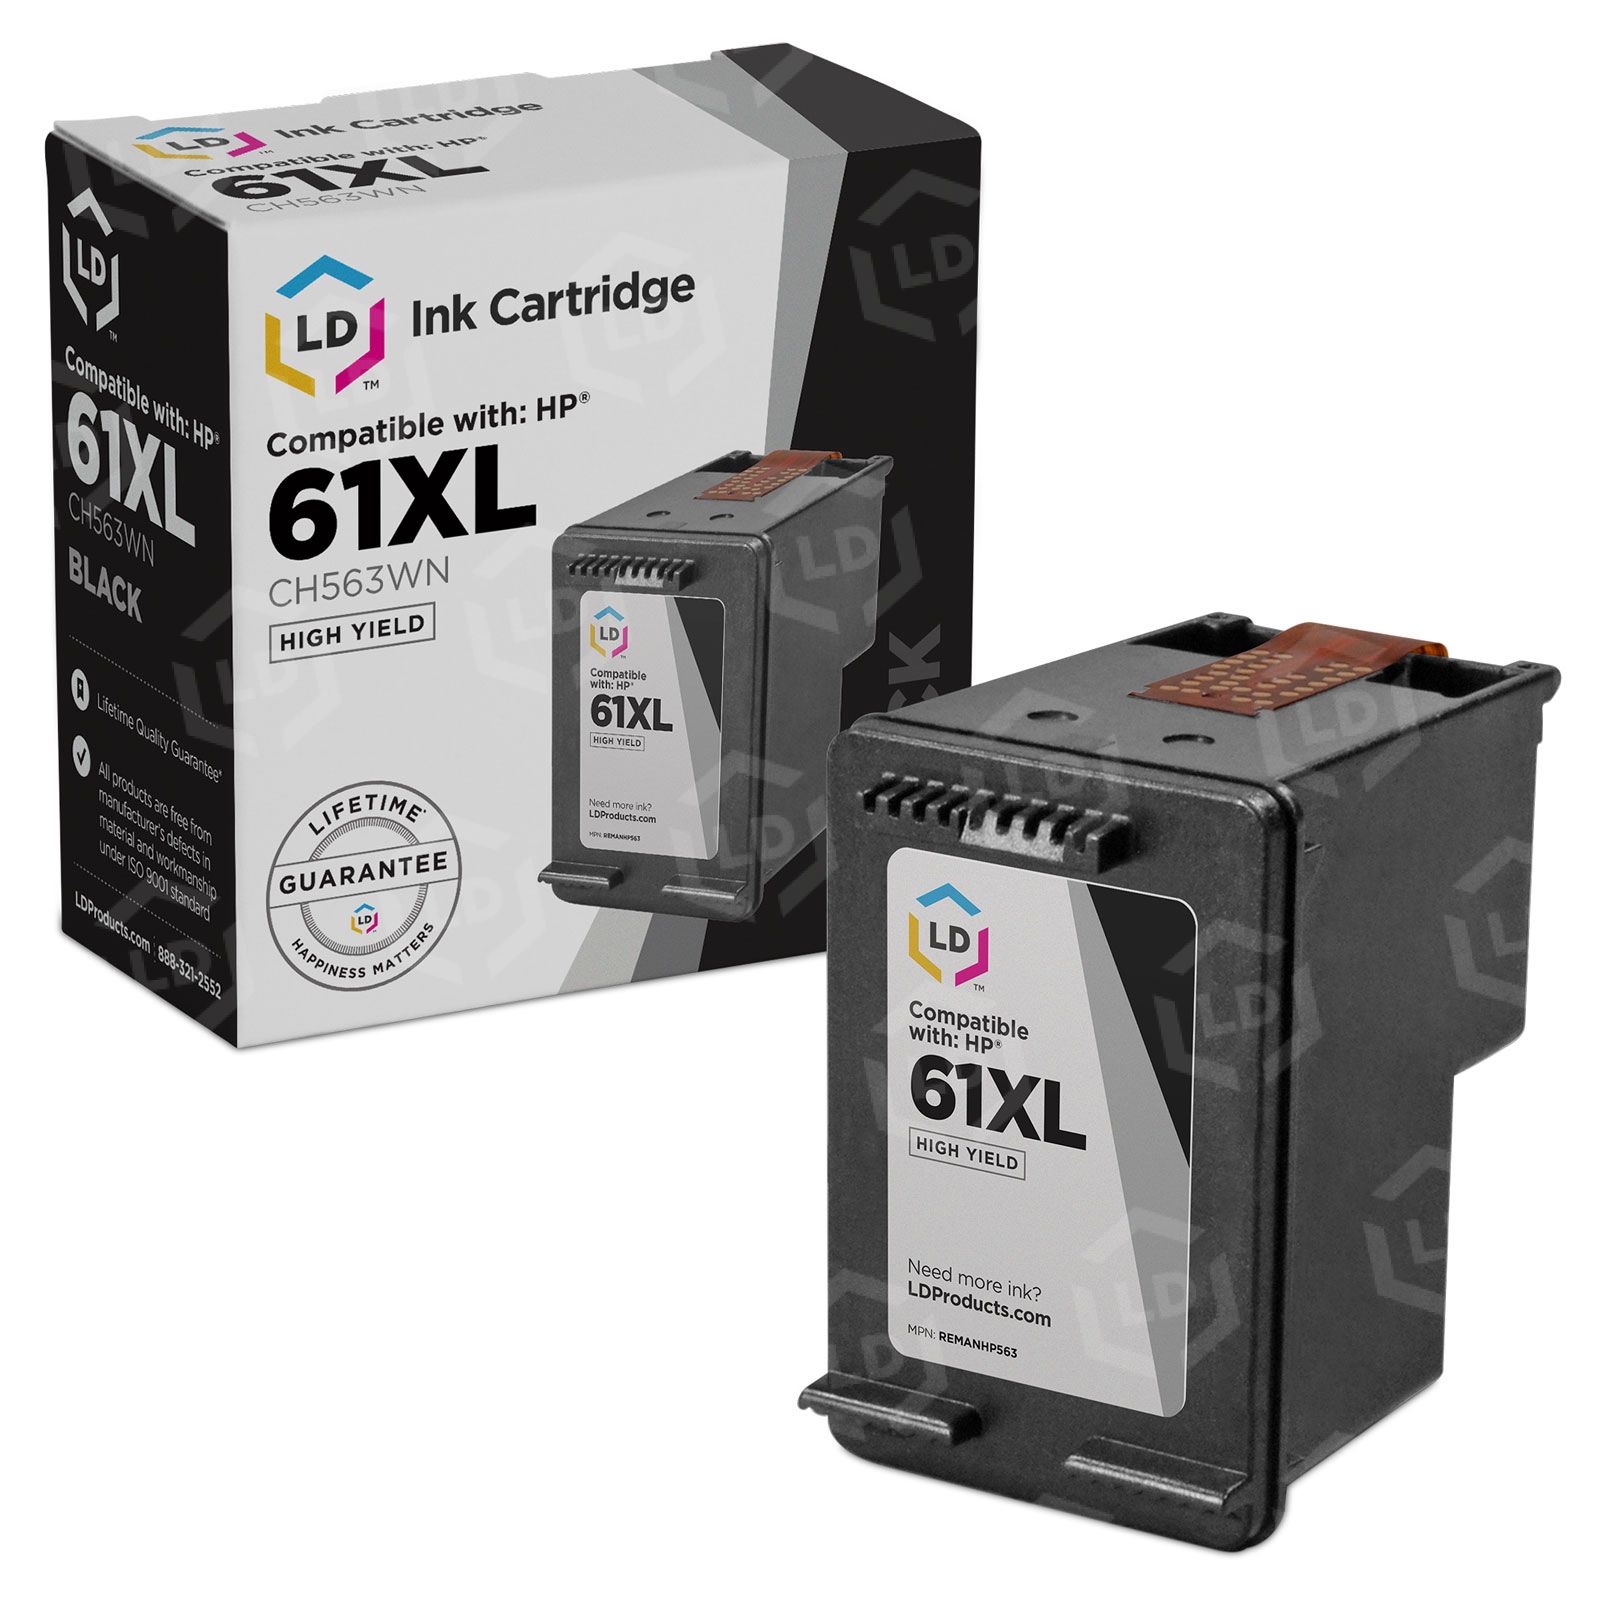 SanSeCai Remanufactured for HP 303 XL Ink Cartridge Black and Color for  HP303 XL Replacement Ink Cartridges for HP Envy 6220 6230 6252 7120 7132  7155